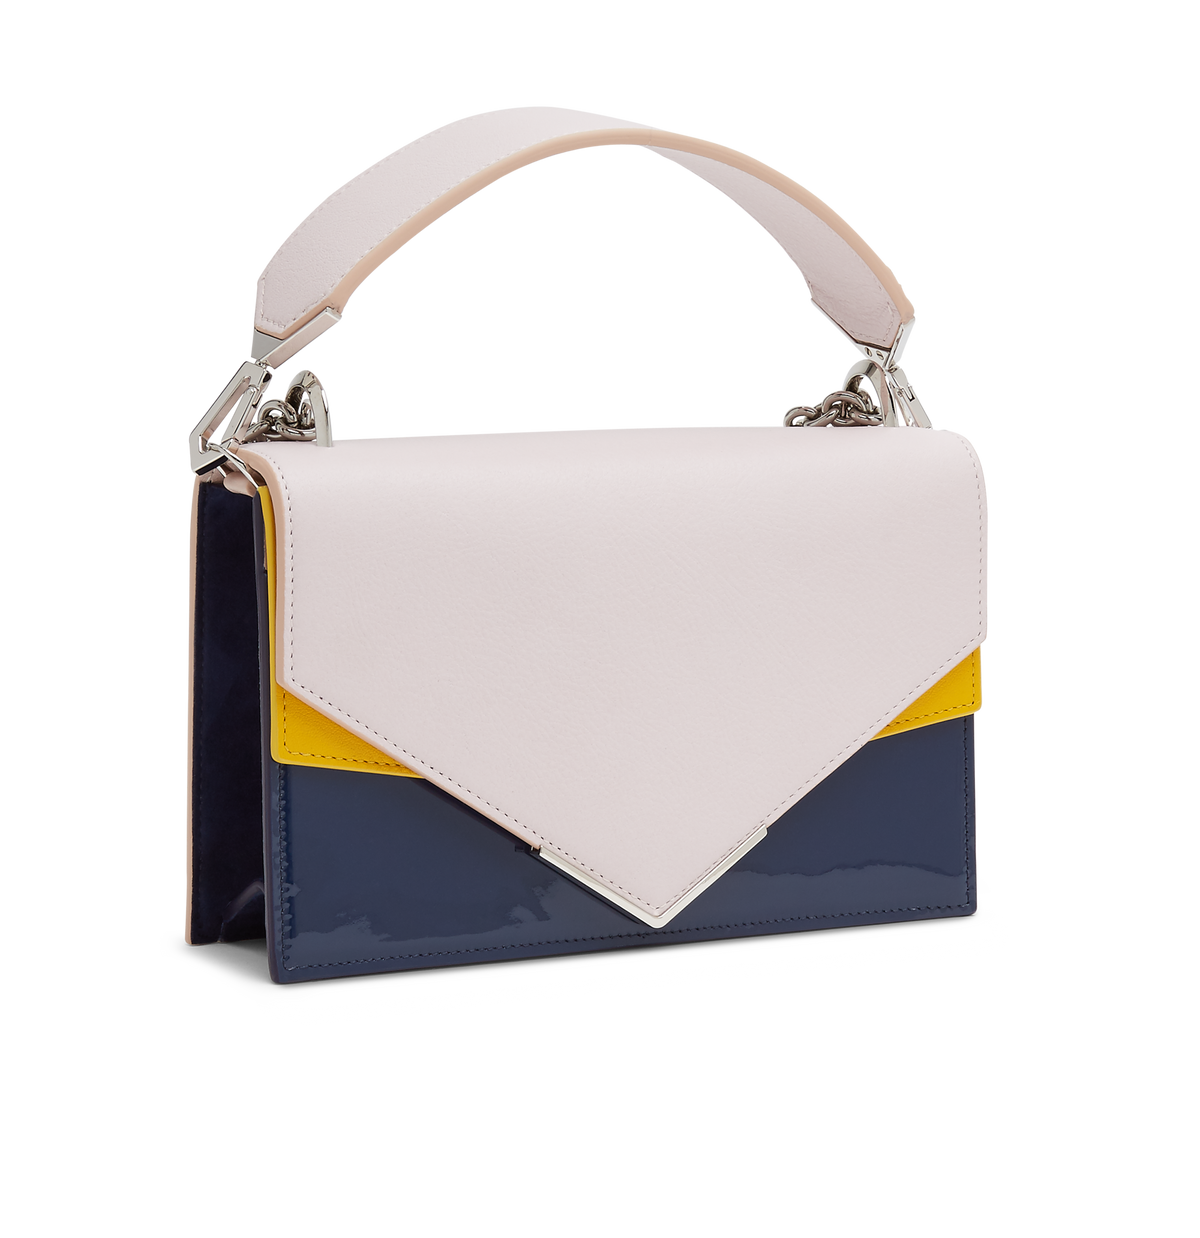 Pink, Navy and Mustard Calf Leather, Patent Leather and Suede with Silver Hardware